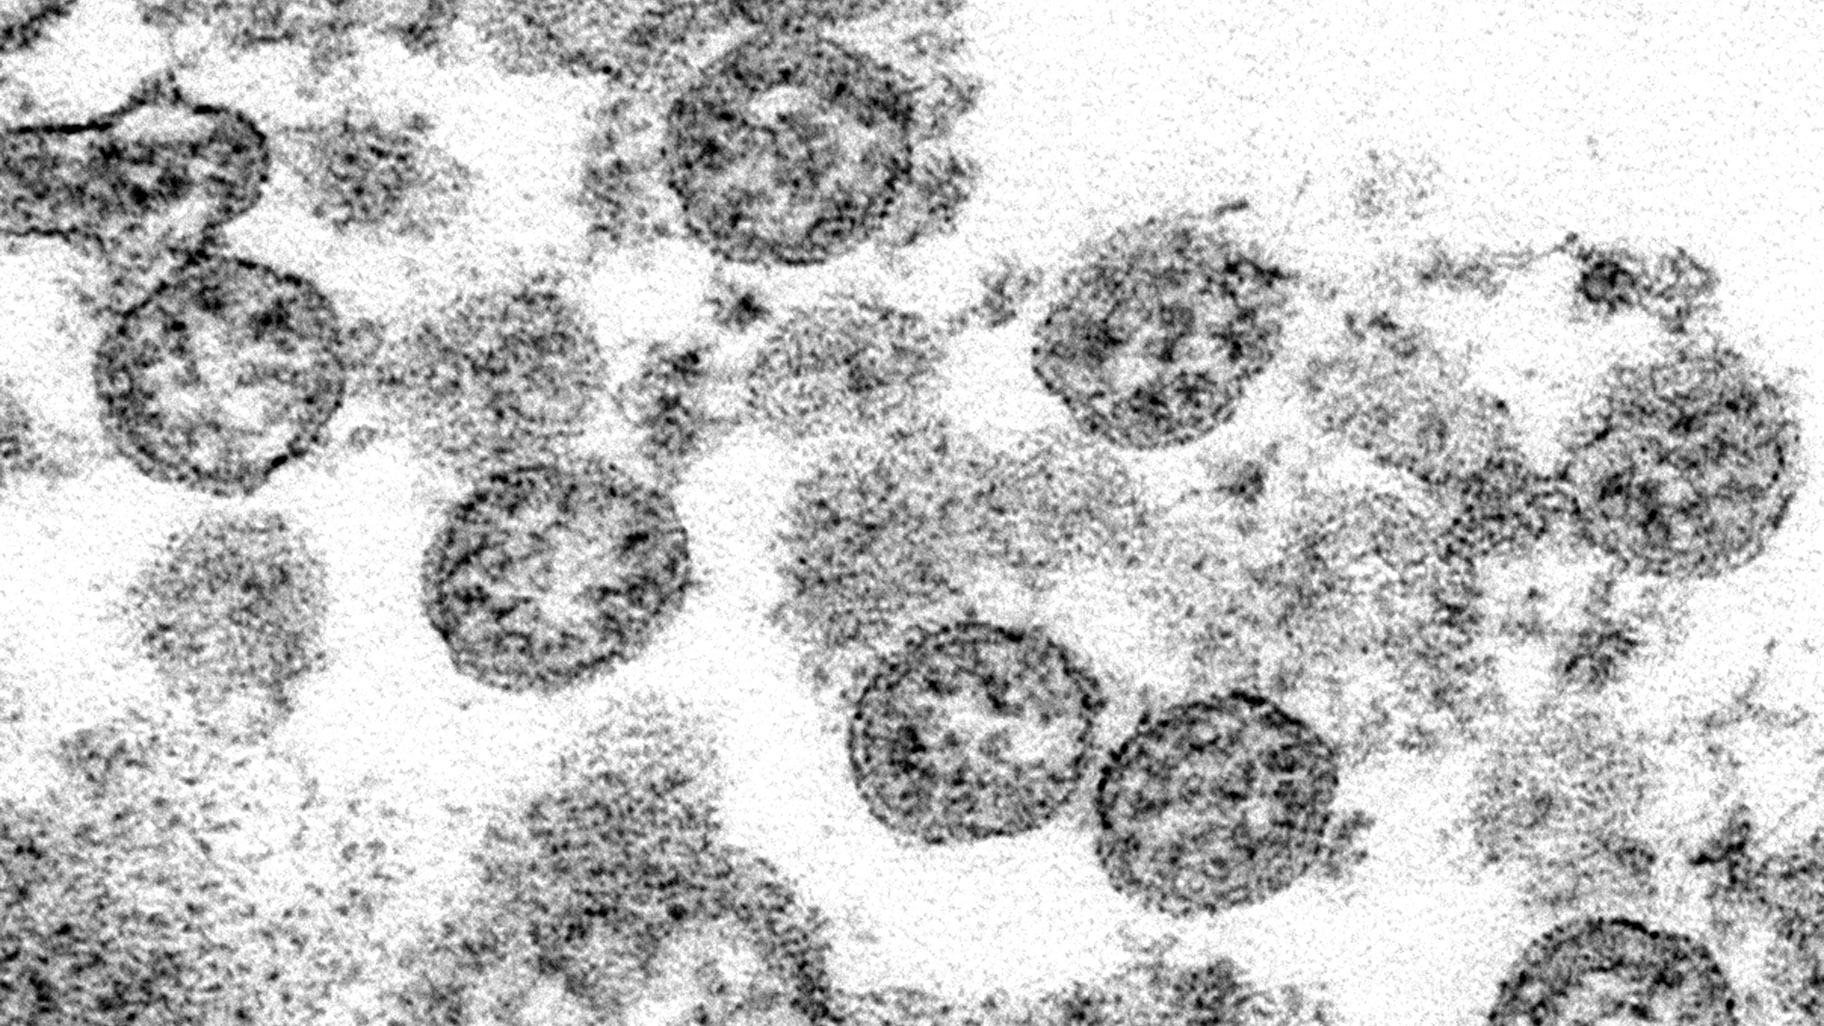 This 2020 electron microscope image made available by the U.S. Centers for Disease Control and Prevention shows the spherical coronavirus particles from what was believed to be the first U.S. case of COVID-19. (C.S. Goldsmith, A. Tamin / CDC via AP)